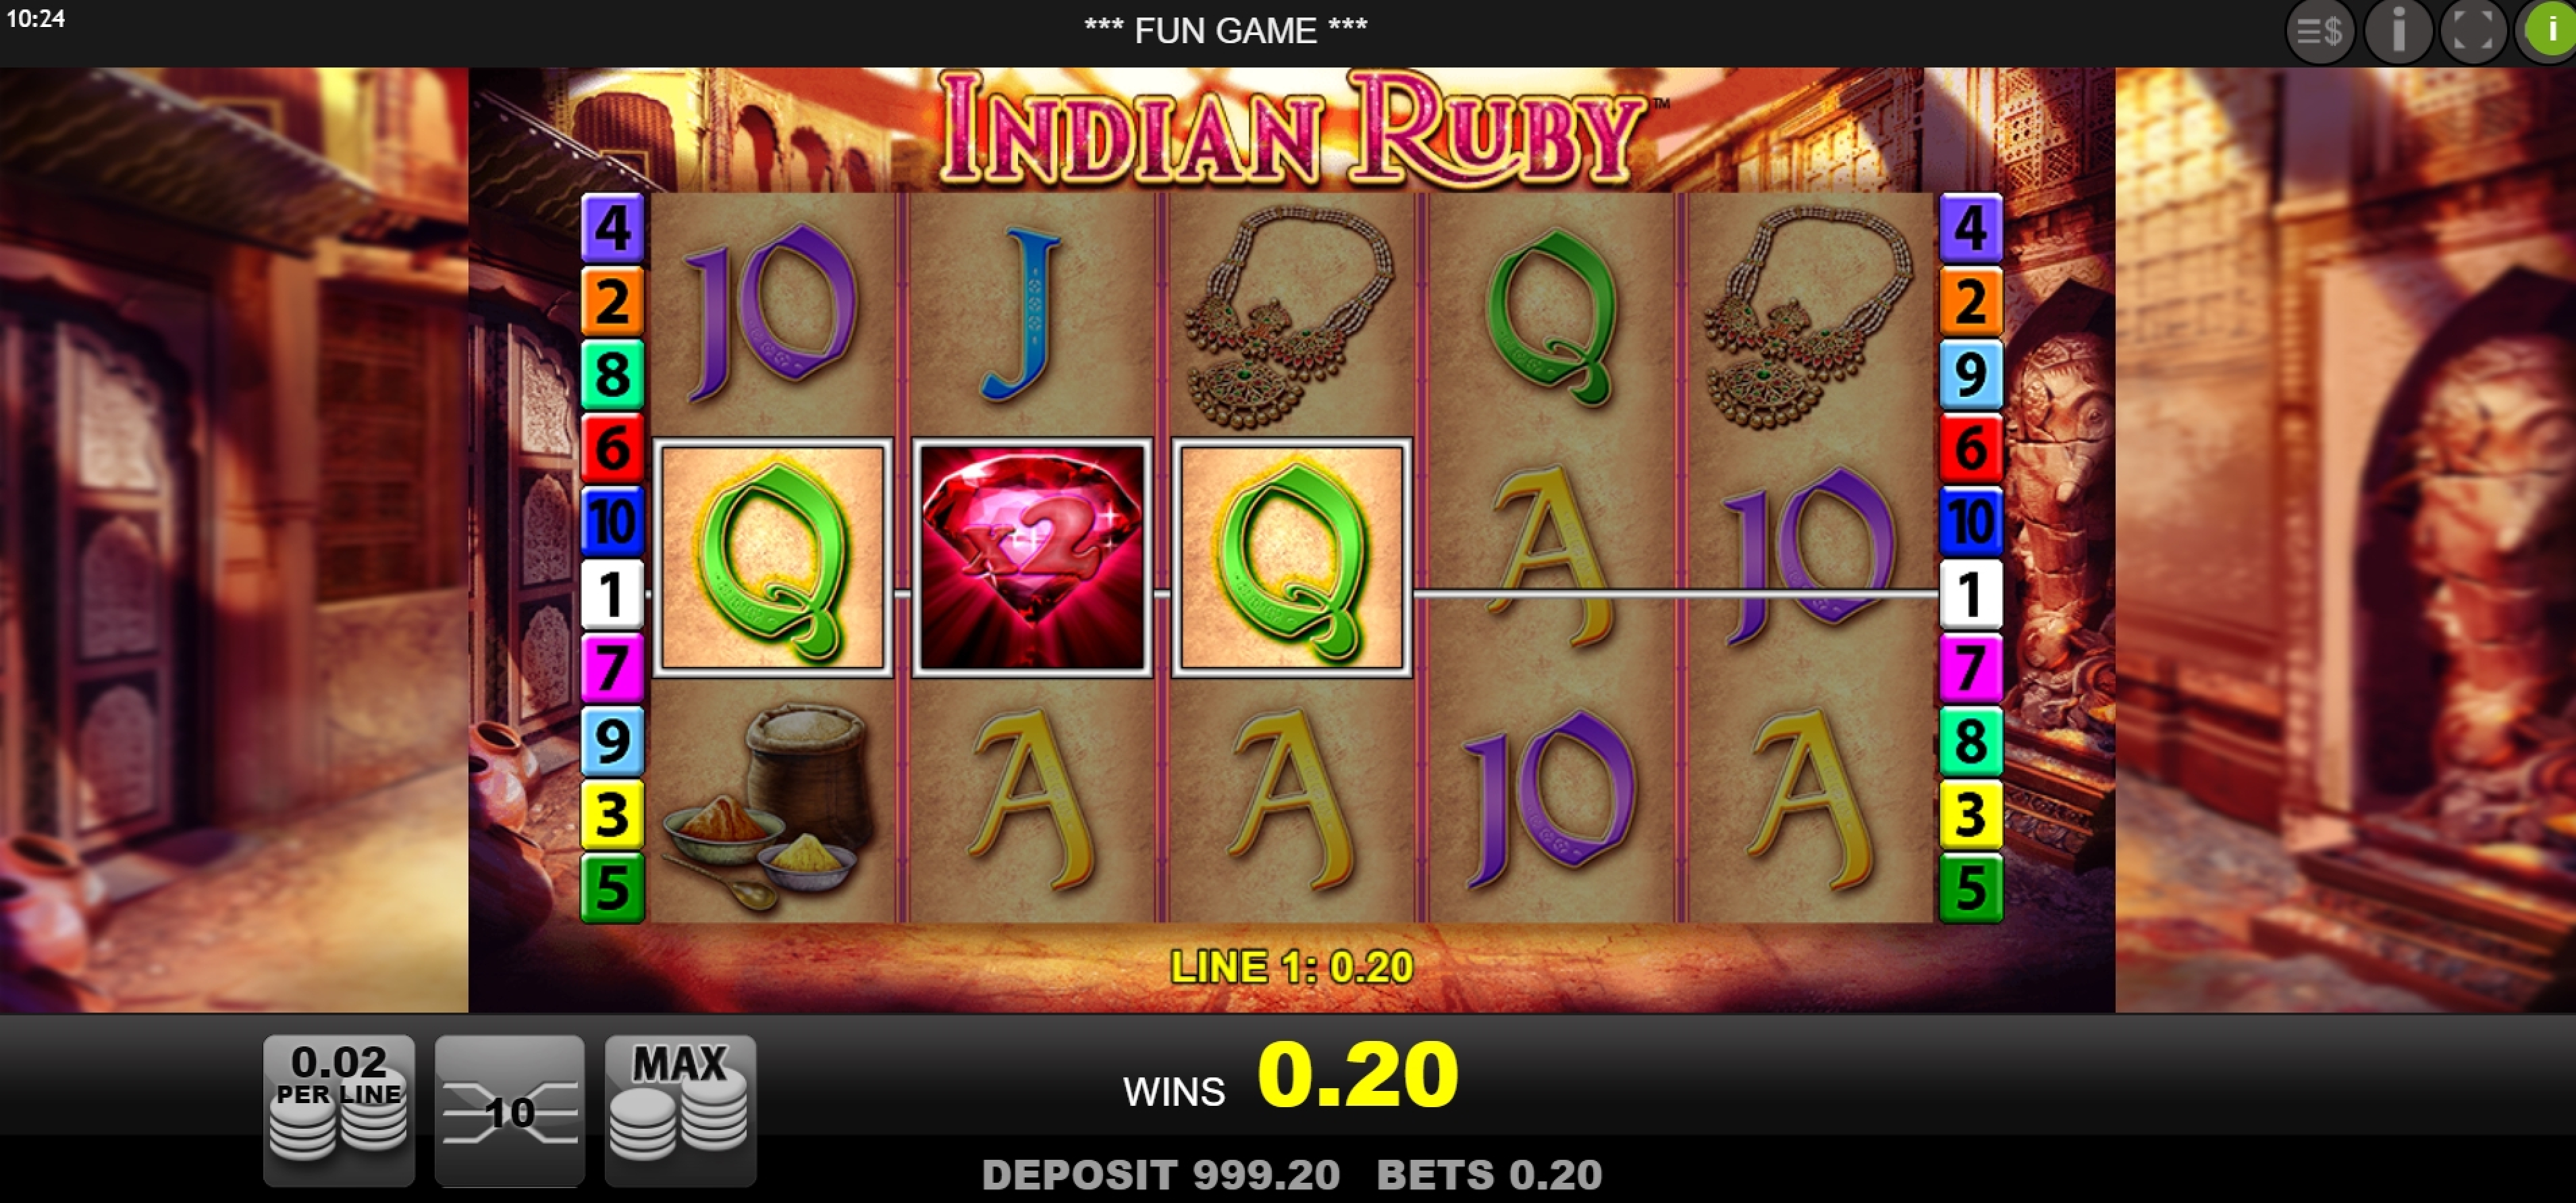 Win Money in Indian Ruby Free Slot Game by Merkur Gaming